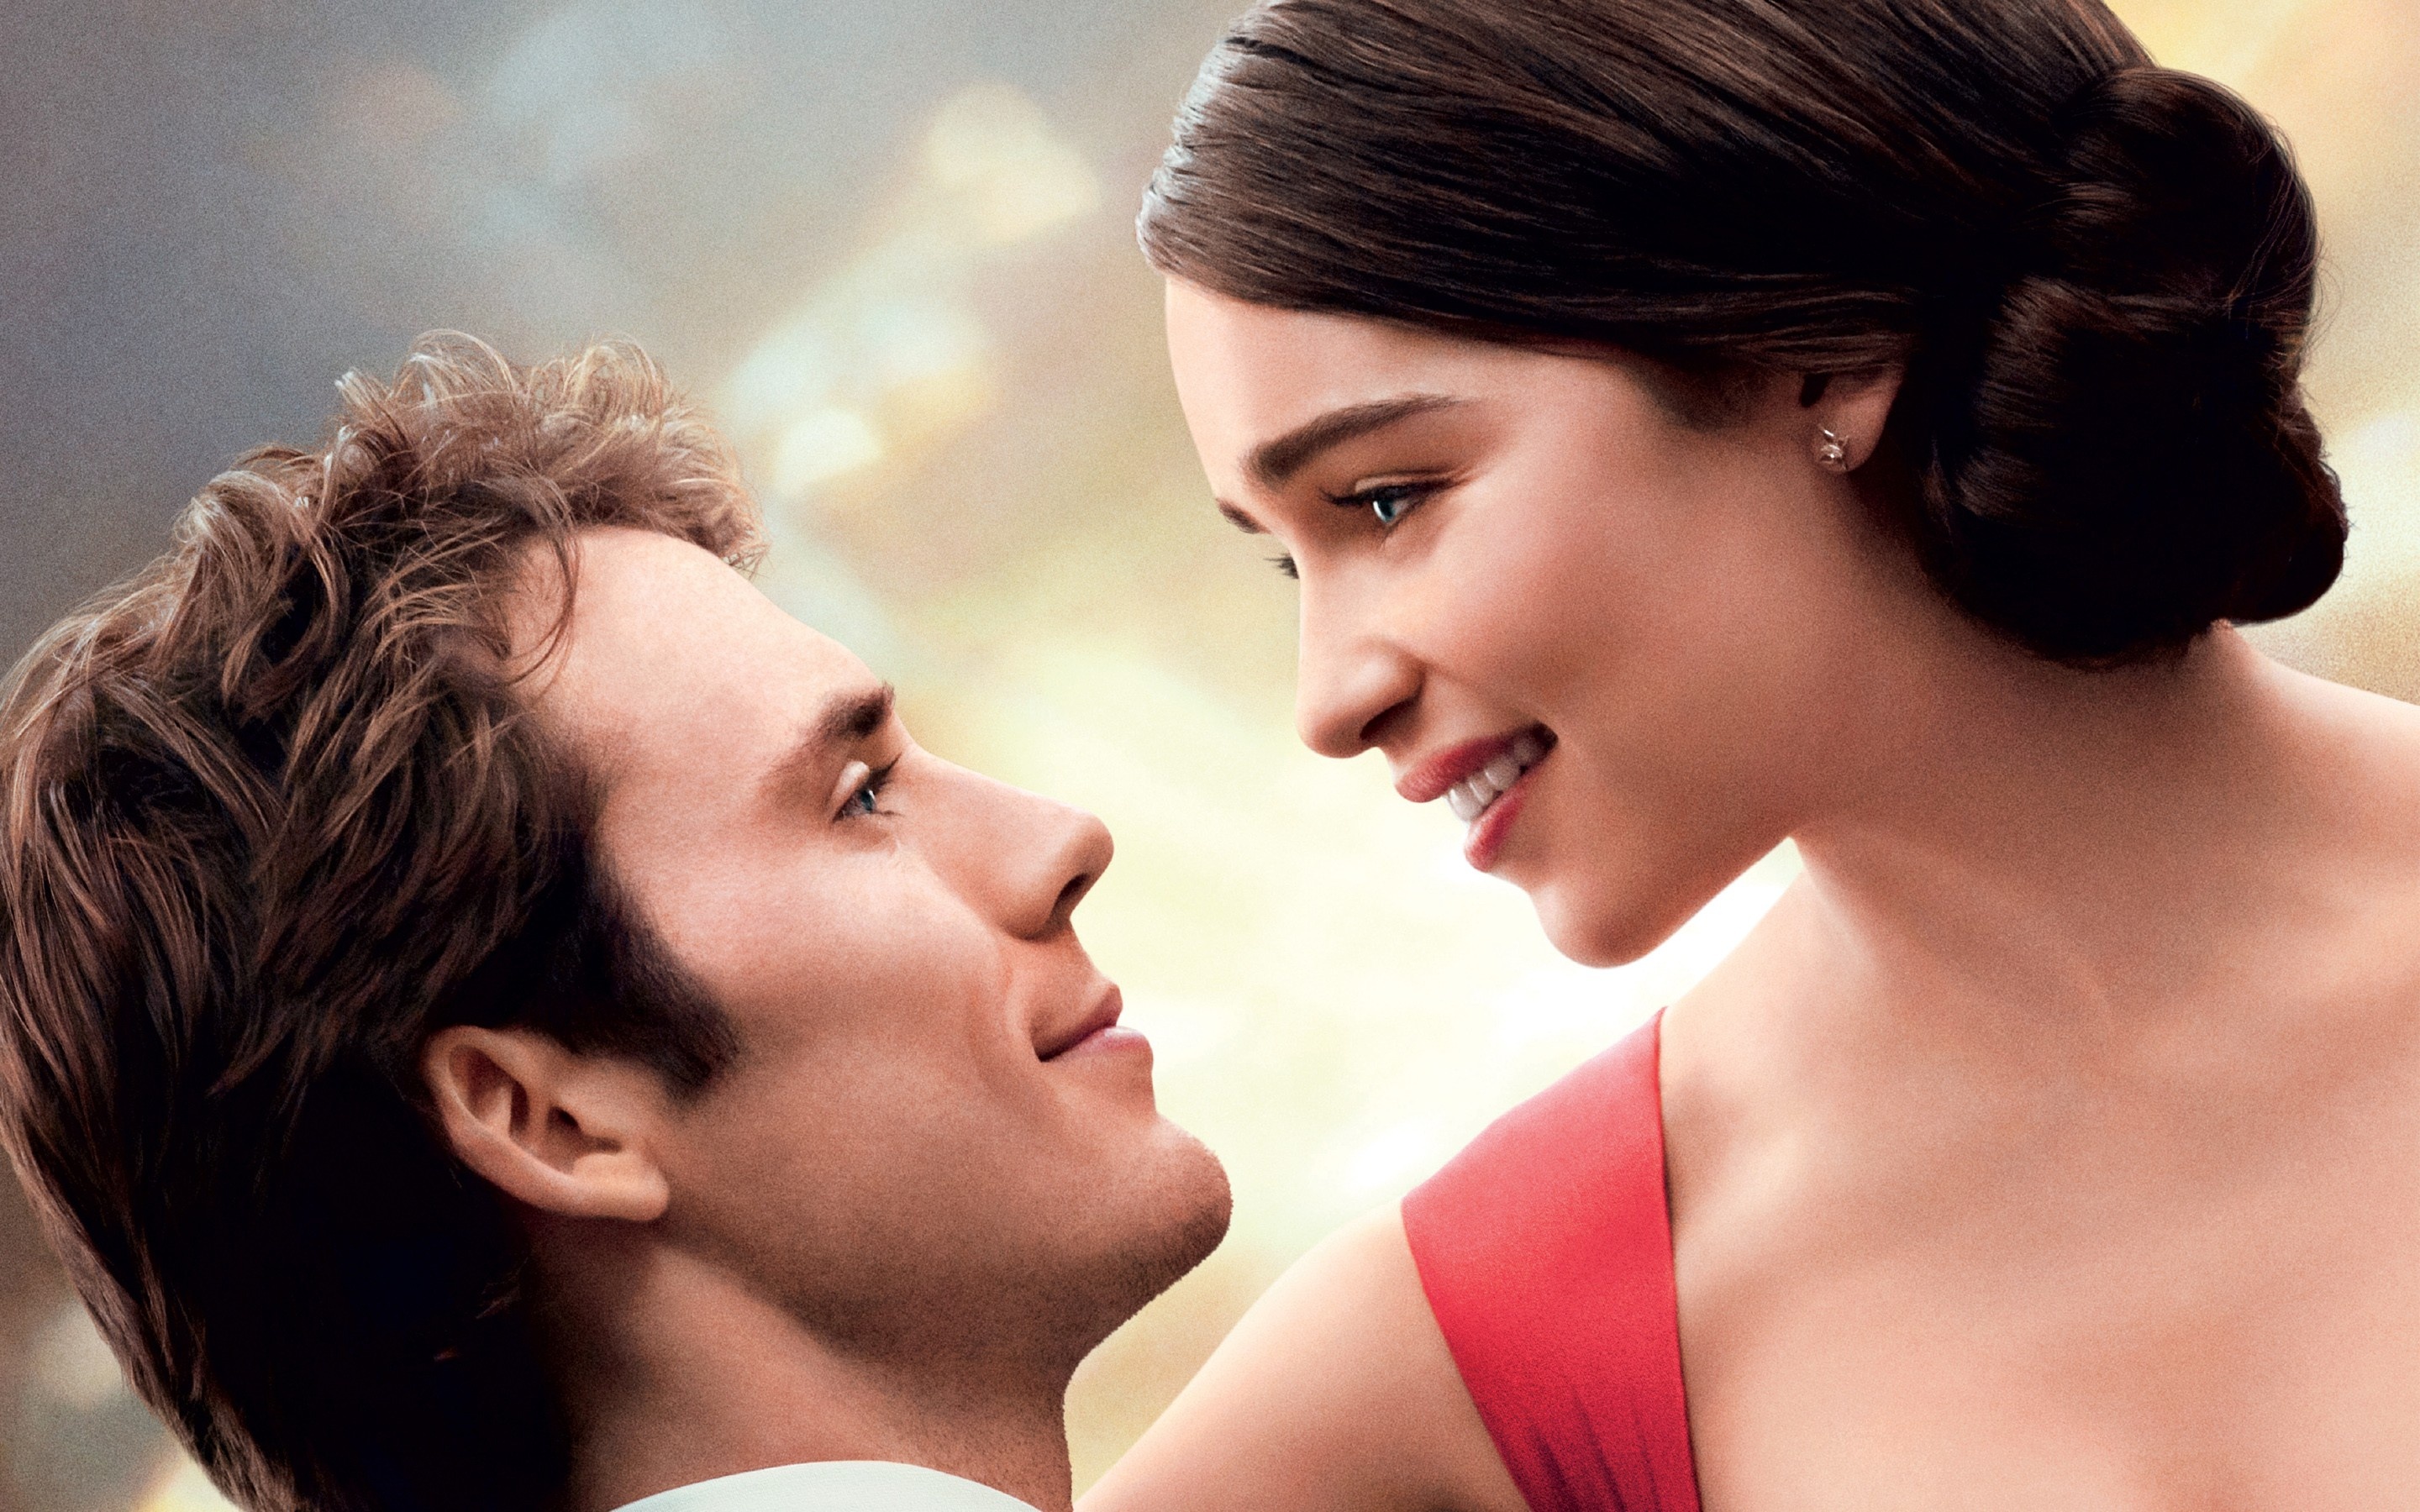 Me Before You (Movie), HD movies 4K wallpapers, Heartwarming tale, Endearing moments, 2880x1800 HD Desktop